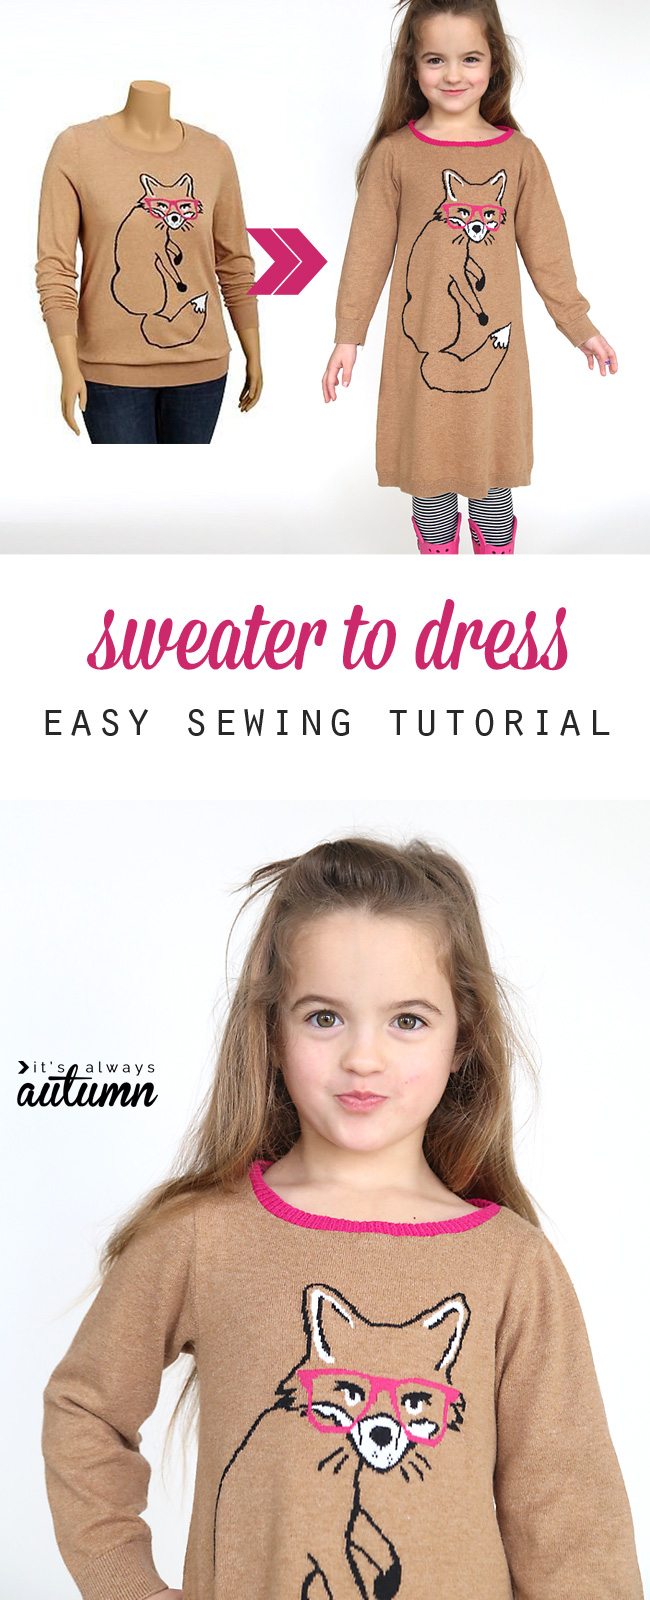 sweater to dress upcycle {easy sewing tutorial} - It's Always Autumn